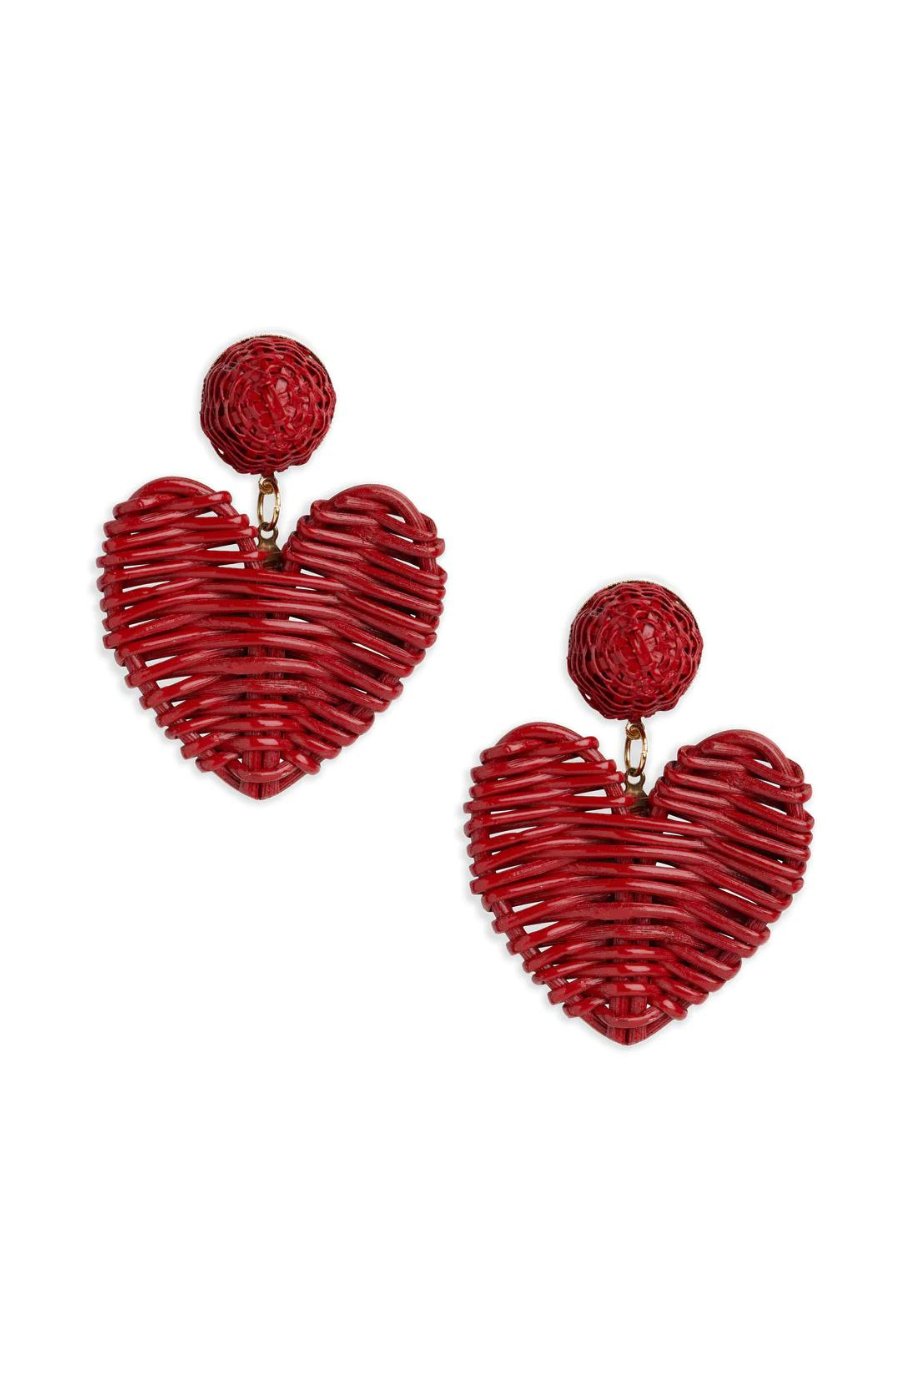 Red Gloss Rattan Hearts - Neely Phelan - Color Game